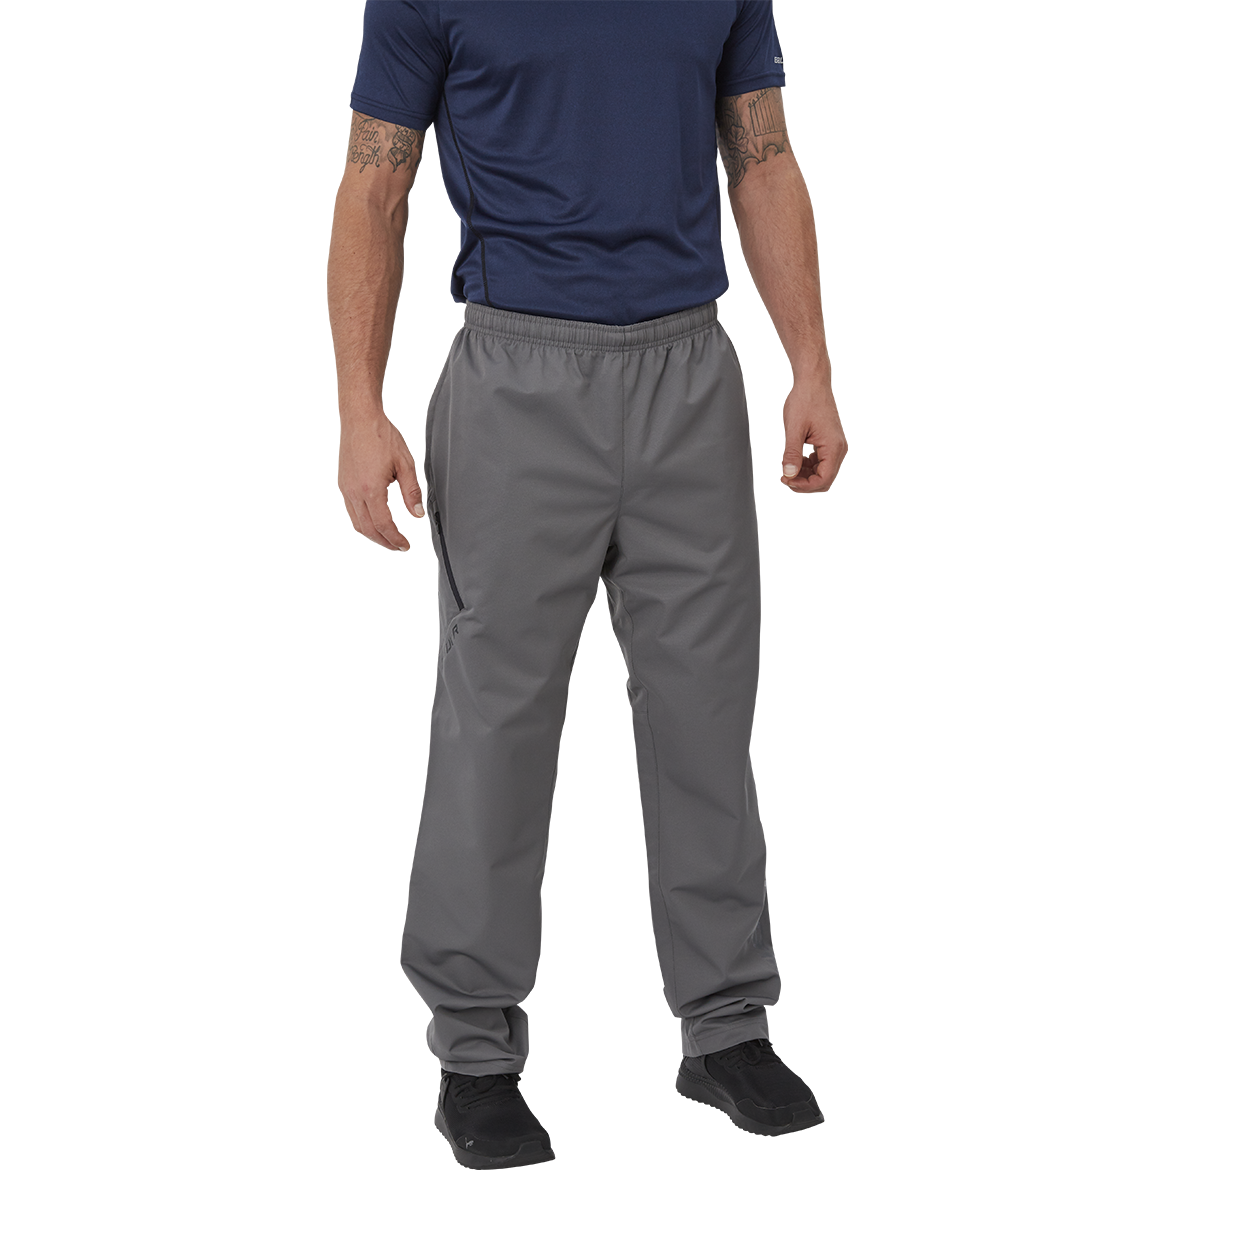 BAUER SUPREME LIGHTWEIGHT PANT YOUTH